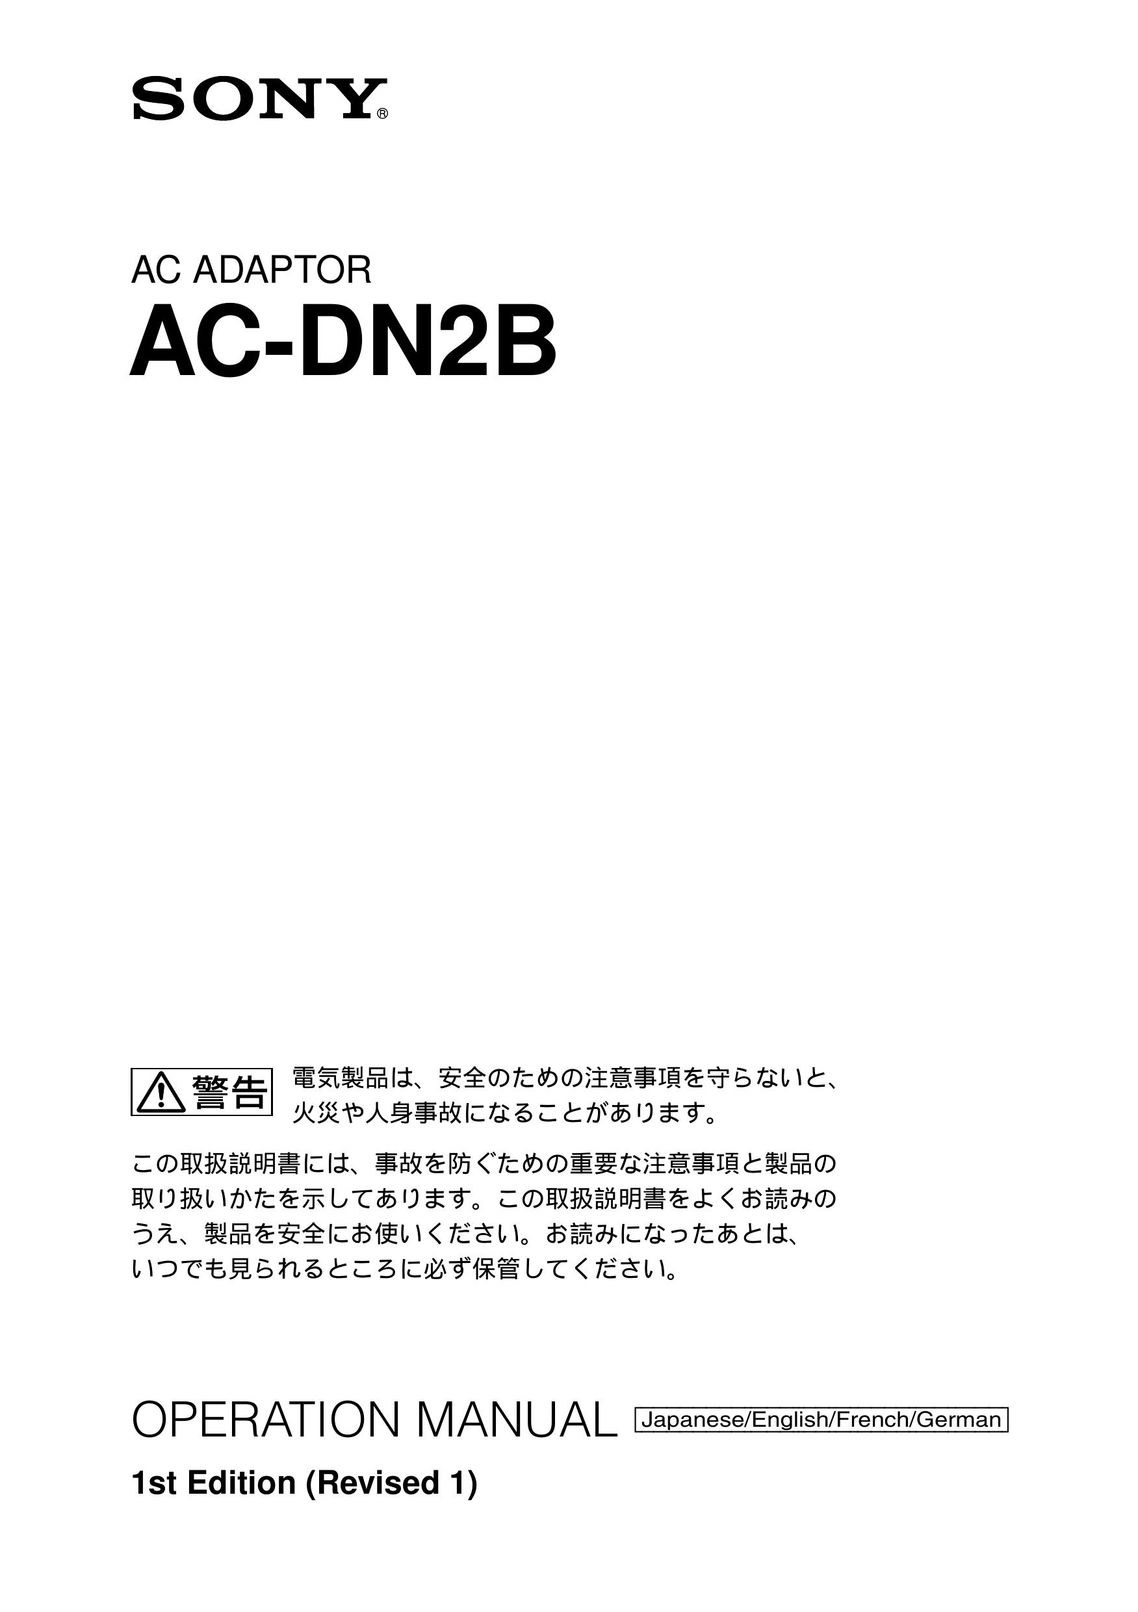 Sony AC-DN2B Video Gaming Accessories User Manual